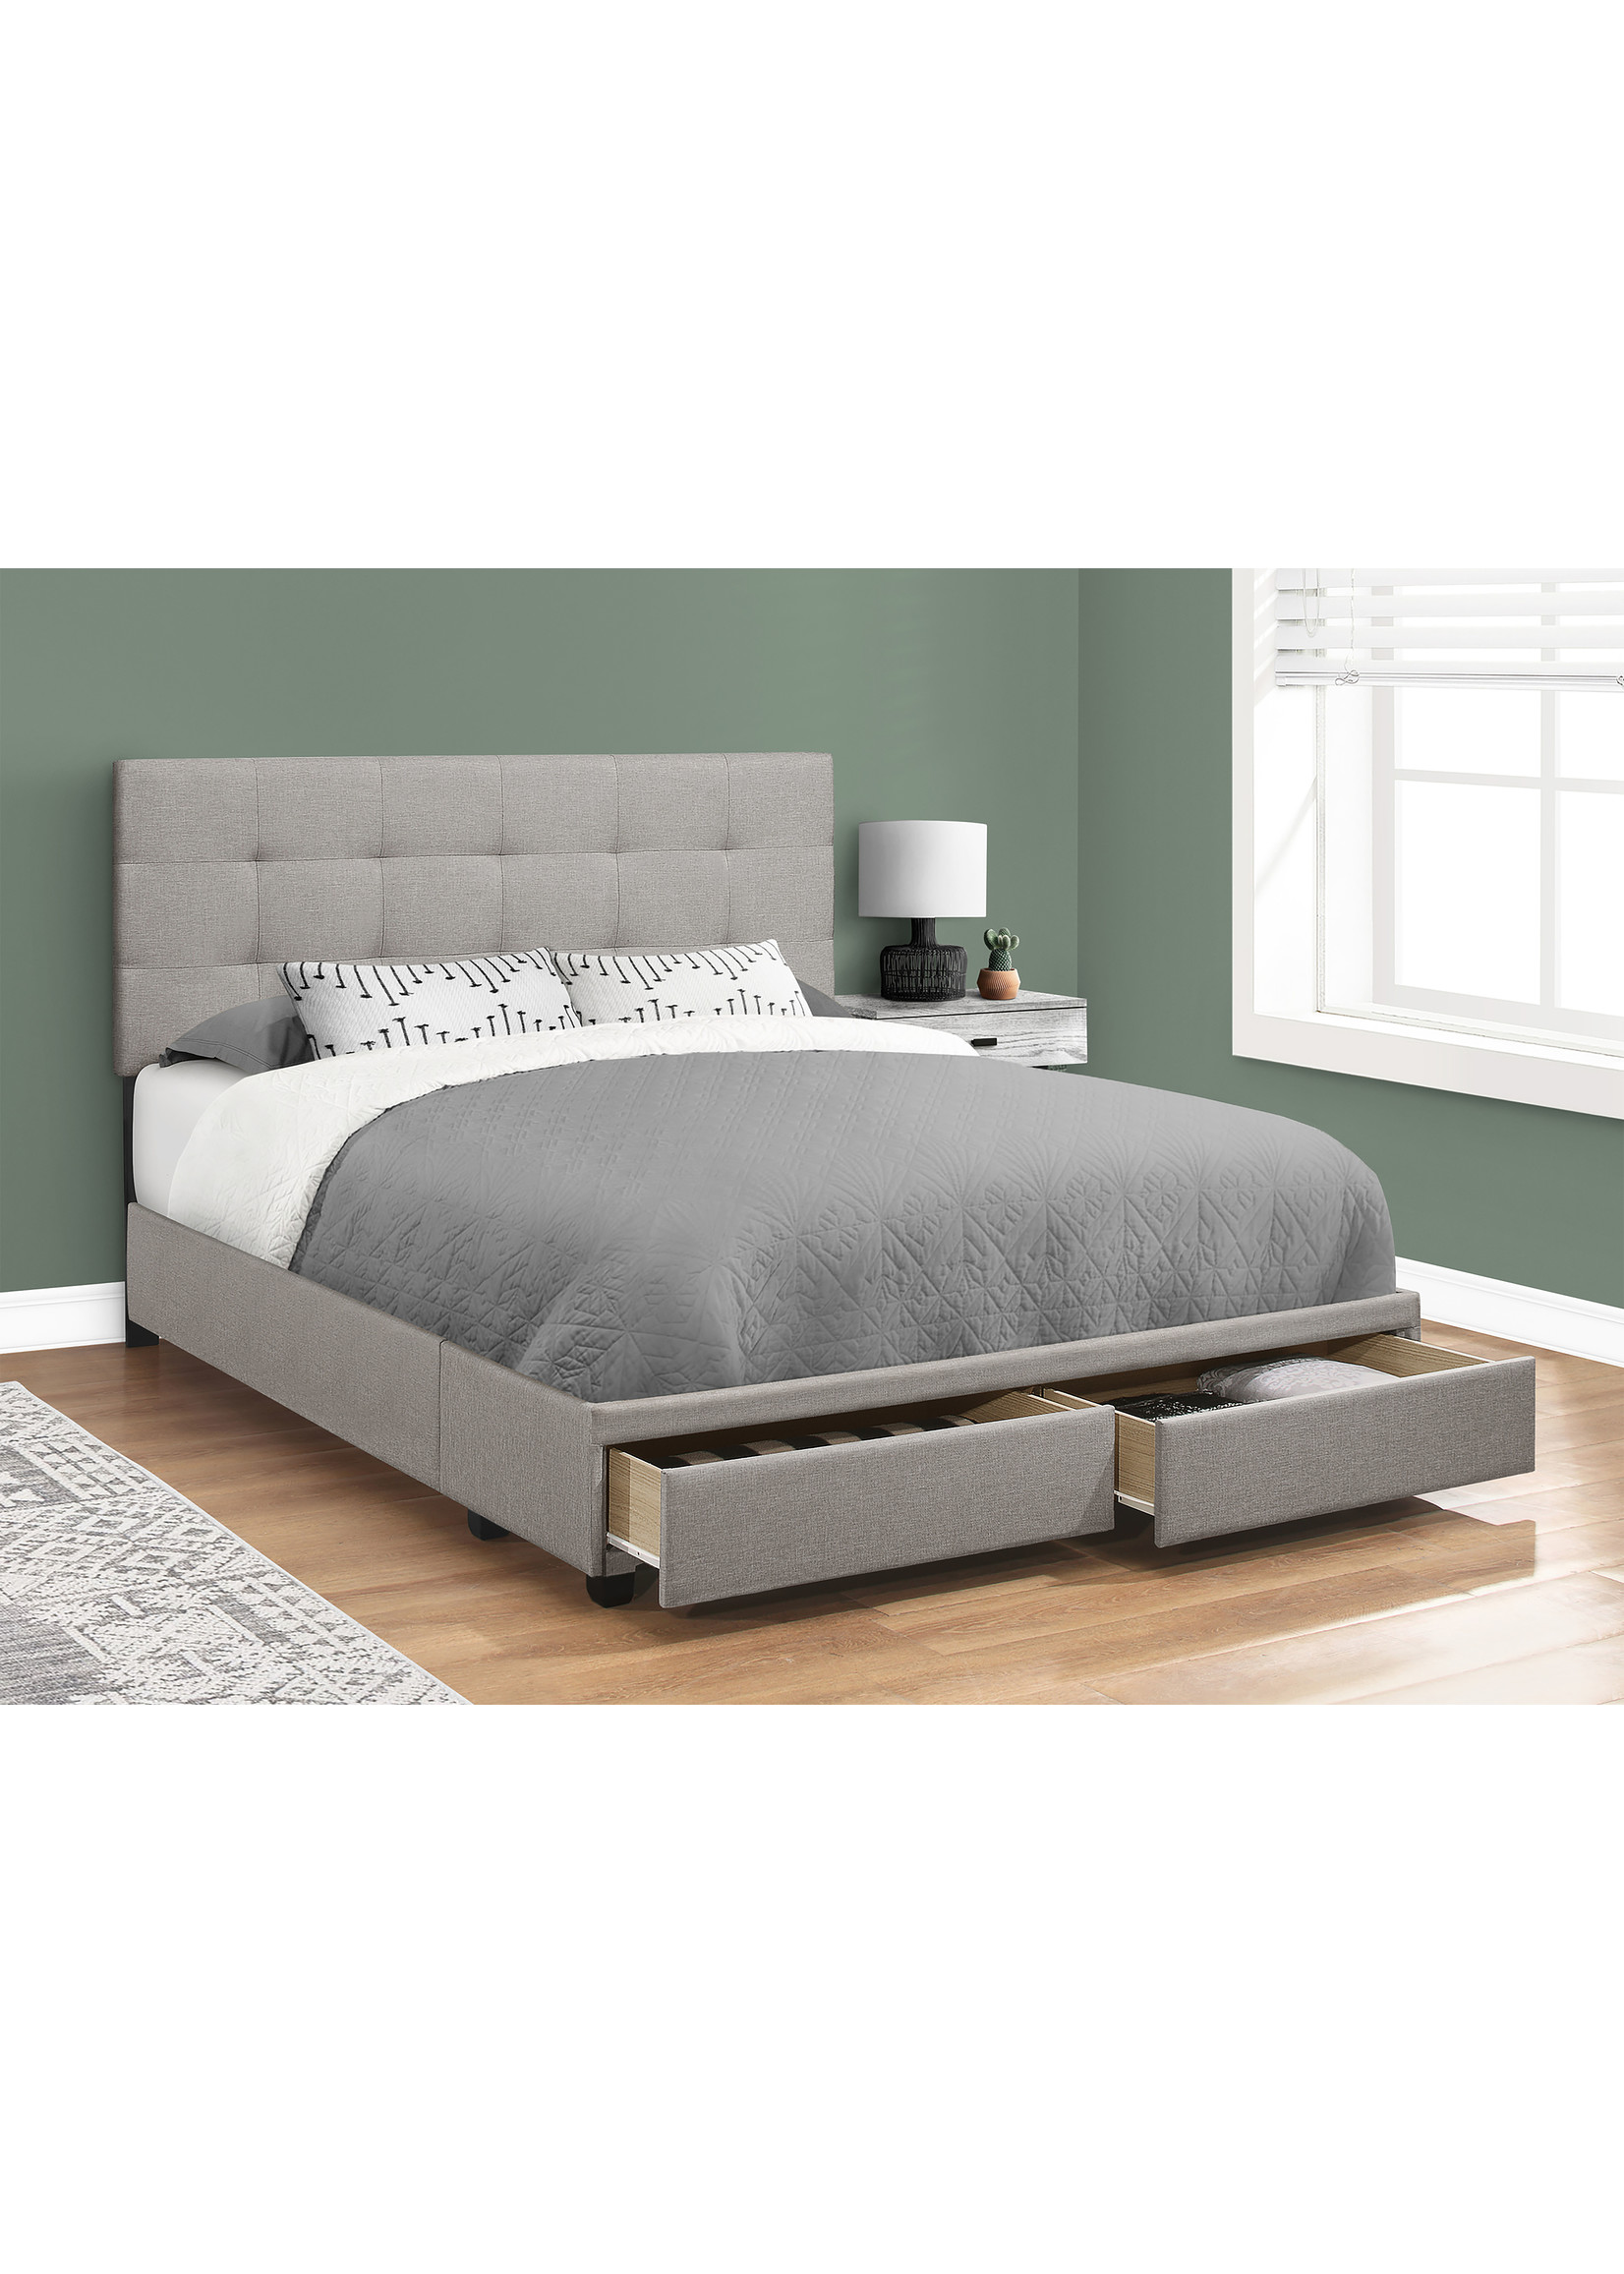 QUEEN GREY LINEN BED FRAME WITH 2 STRORAGE DRAWERS